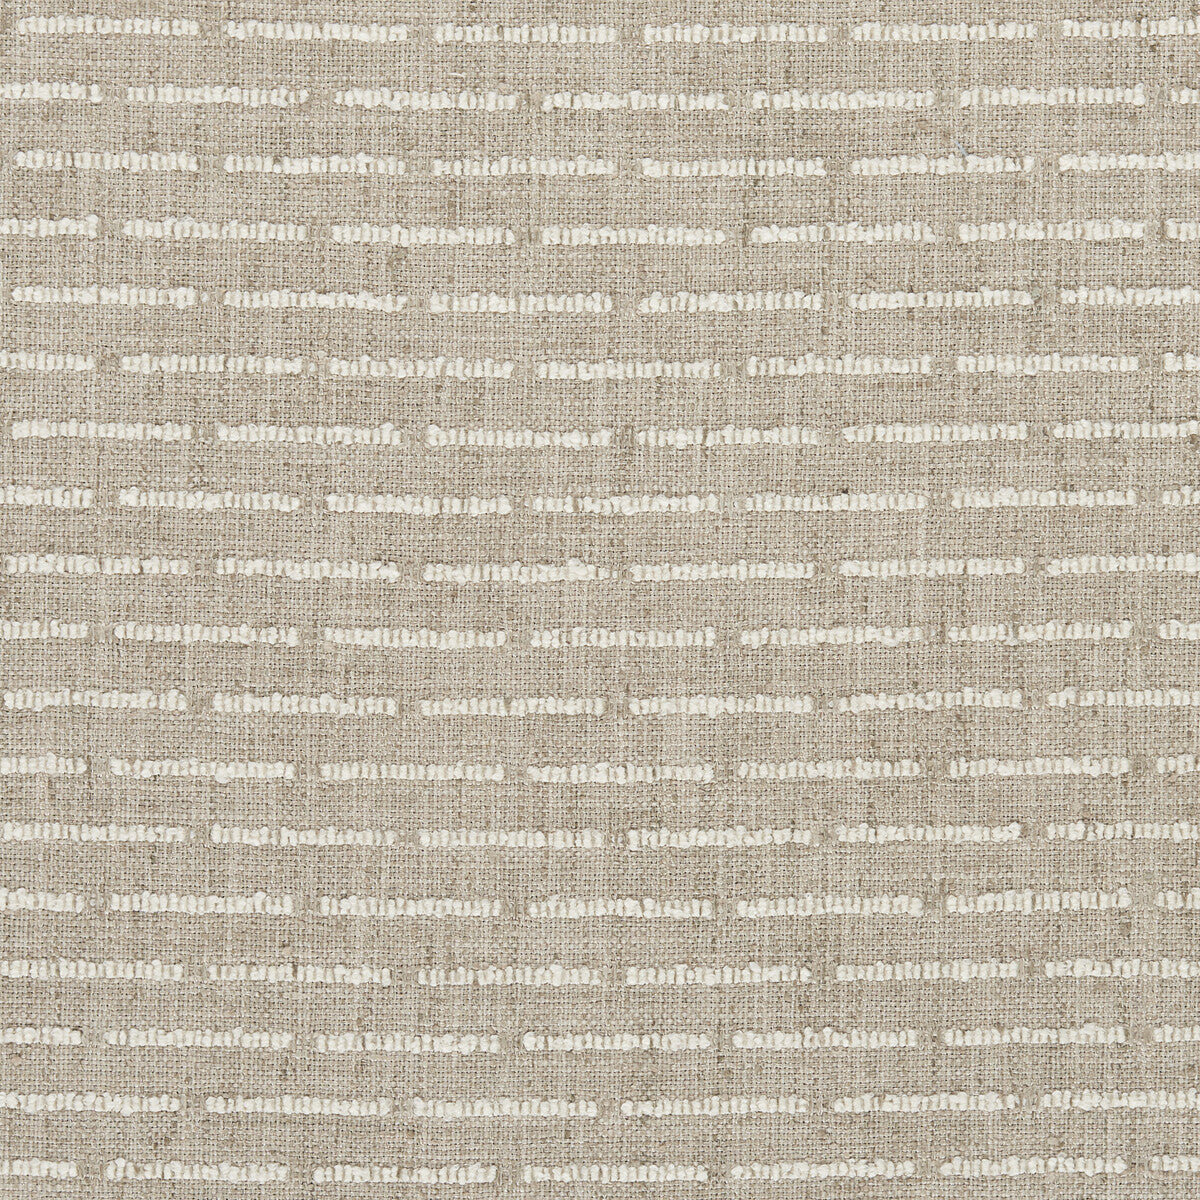 Kravet Basics fabric in 36528-11 color - pattern 36528.11.0 - by Kravet Basics in the Bungalow Chic II collection